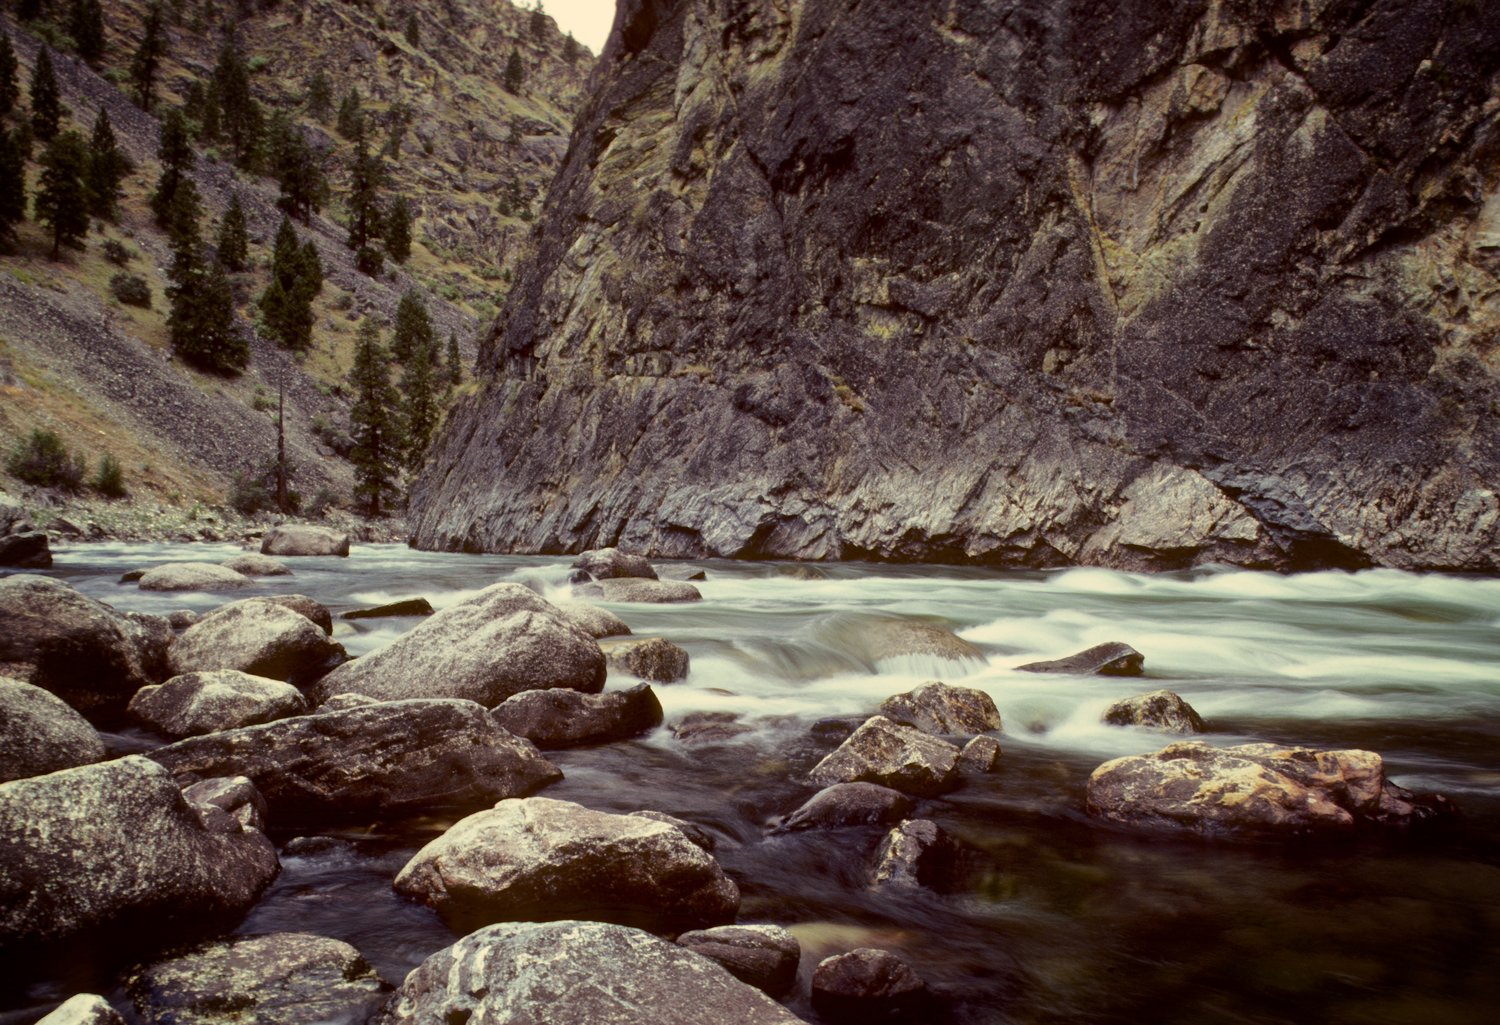 The Salmon River's Middle Fork—"The River of No Return."